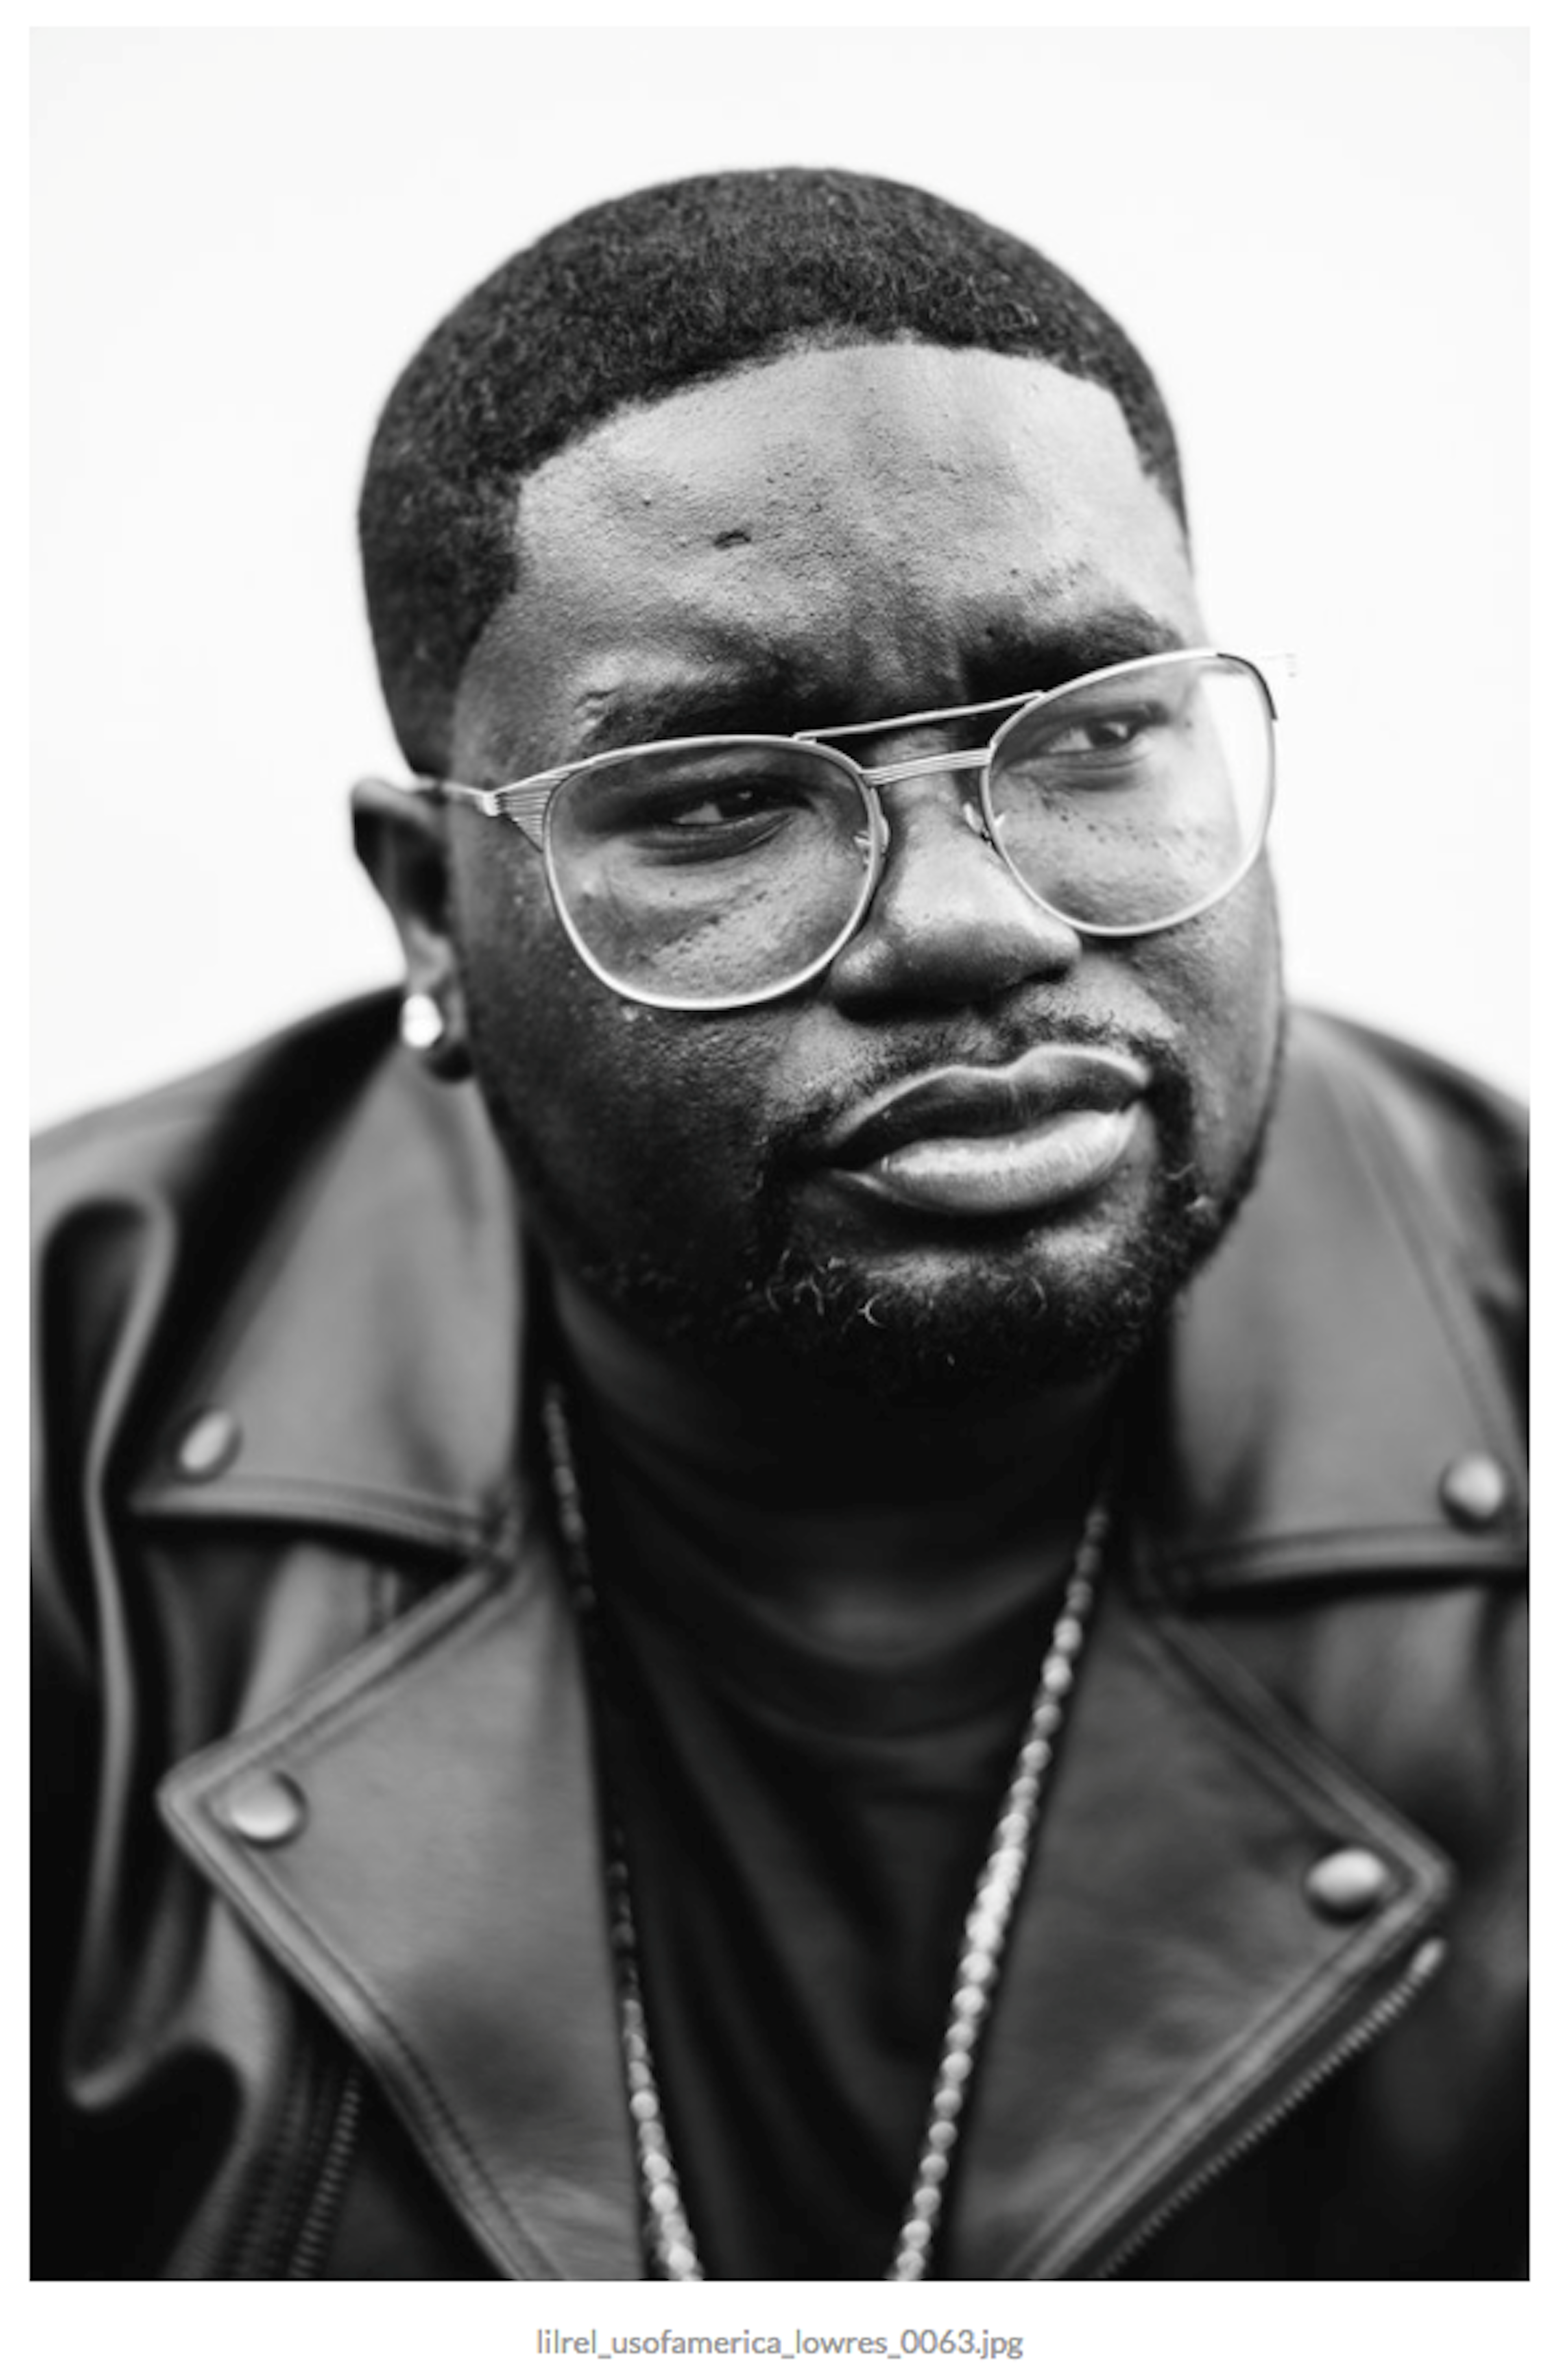 The Mill' Director Recalls Lil Rel Howery's Decision To Remain